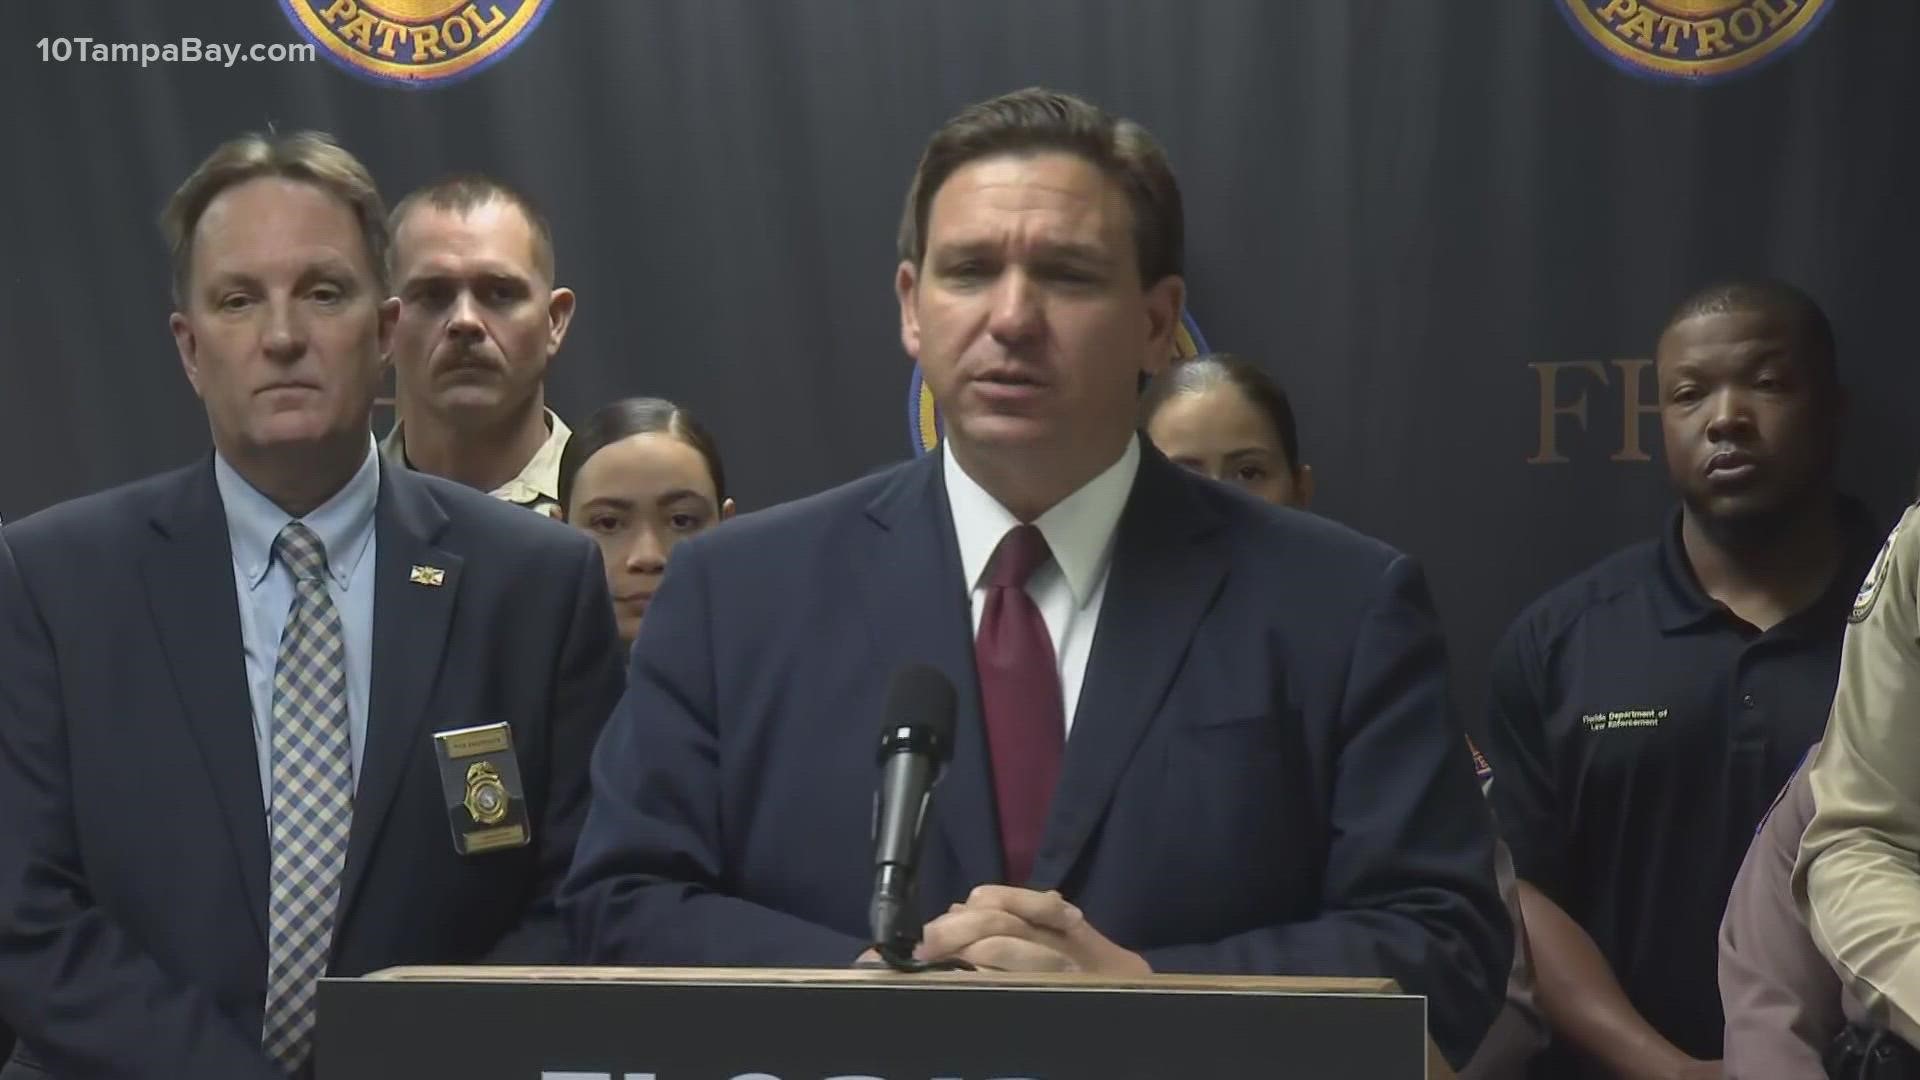 The governor has reiterated his support for law enforcement members and advocates against the notion of "defunding the police."